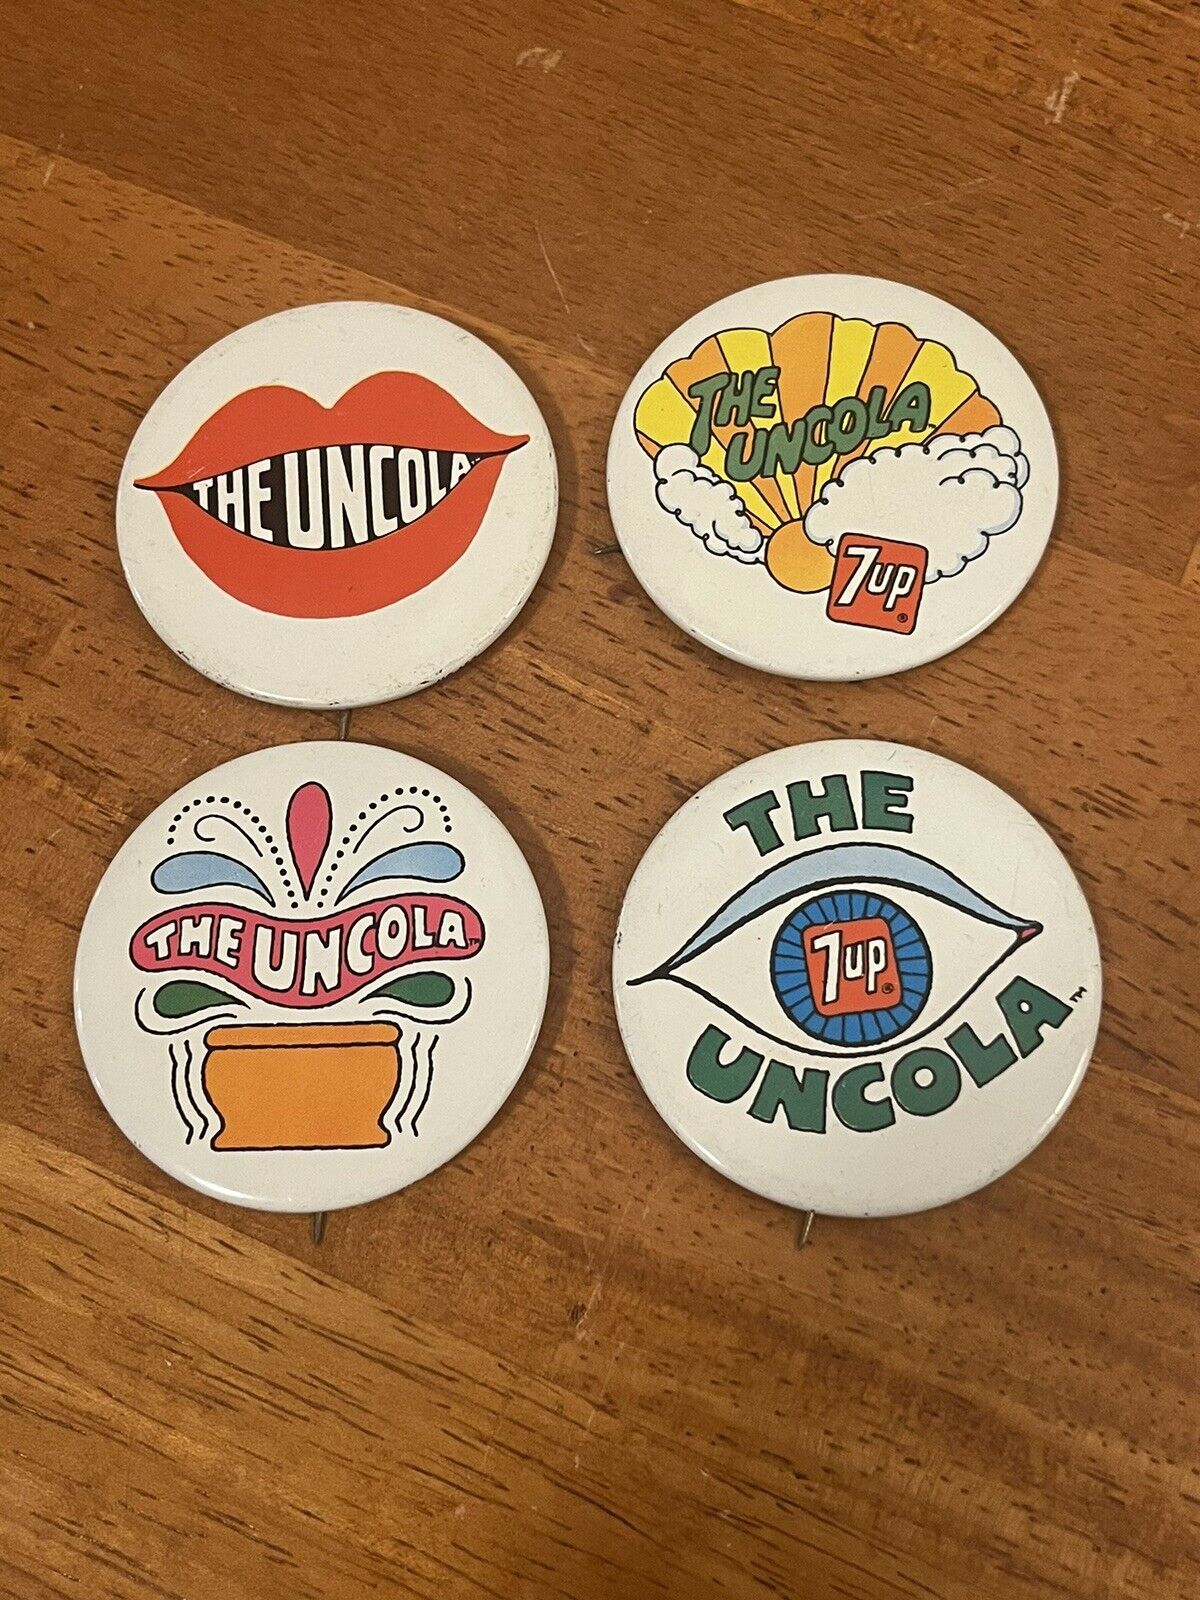 The Uncola 7 Up pinback button 1960s or 1970s advertising campaign 